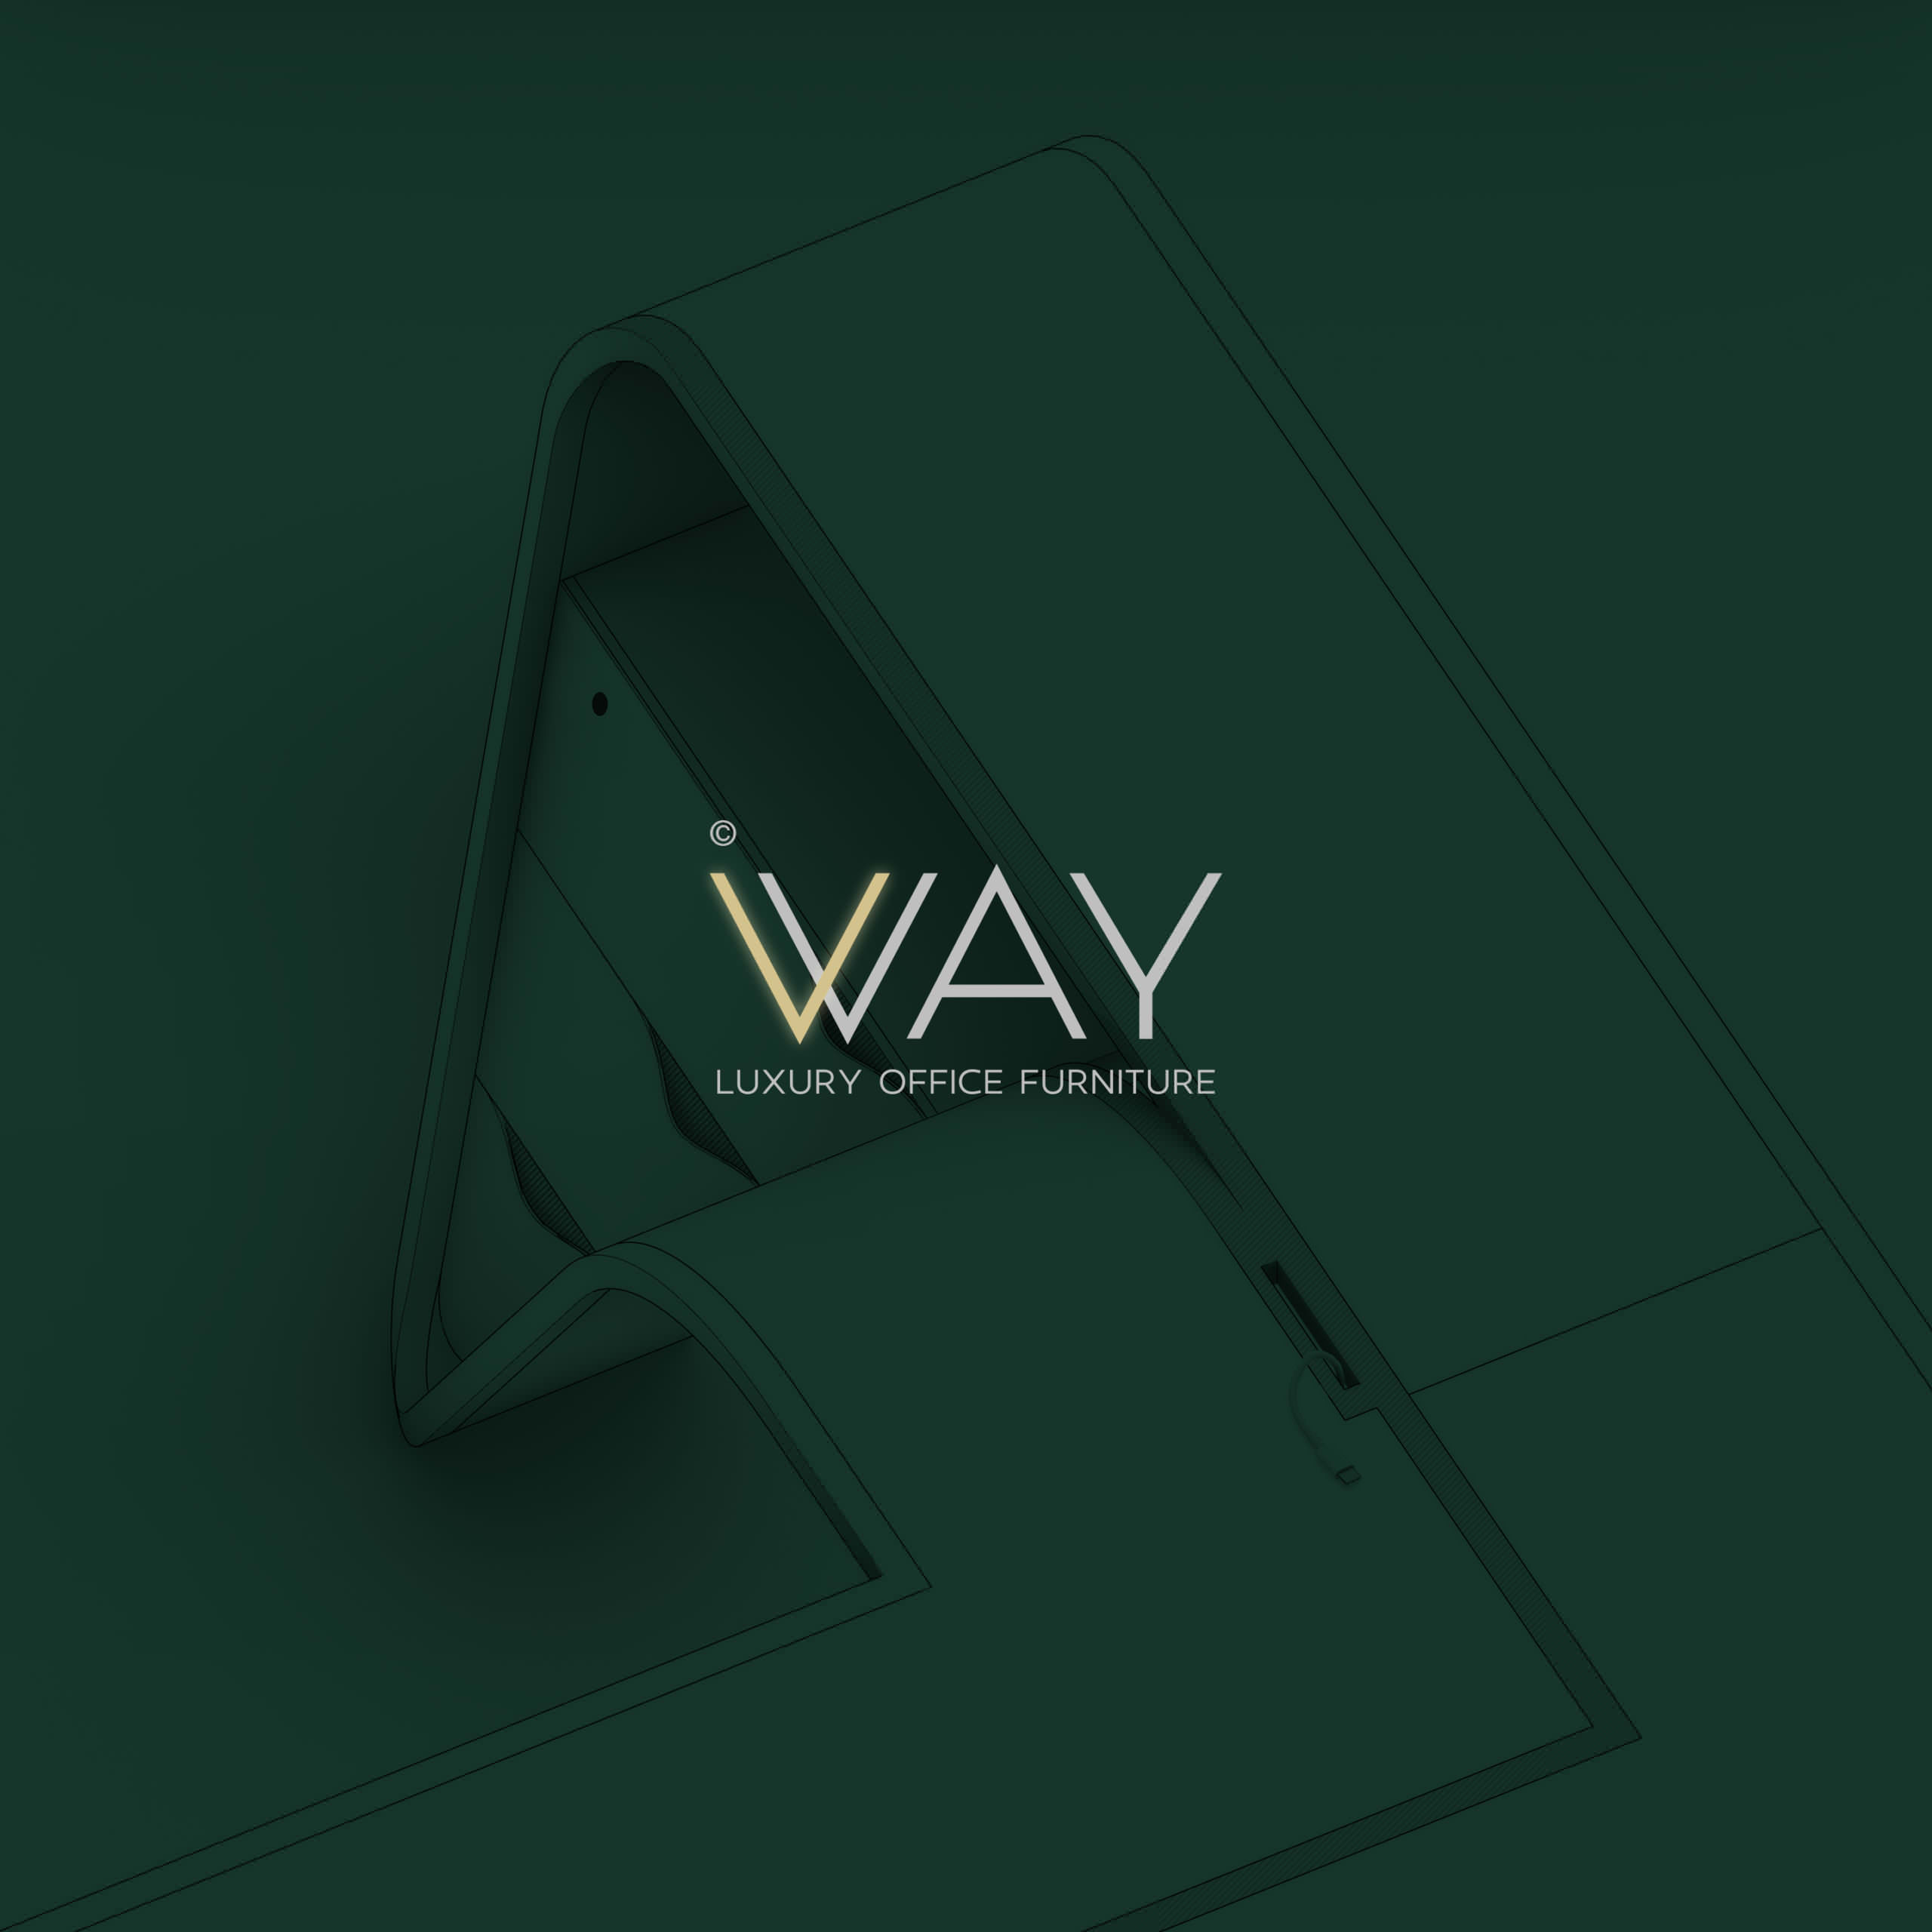 WAY-CEO COLLECTION - LUXURY (FEEEL prize) 000822 (1)-33a7272b